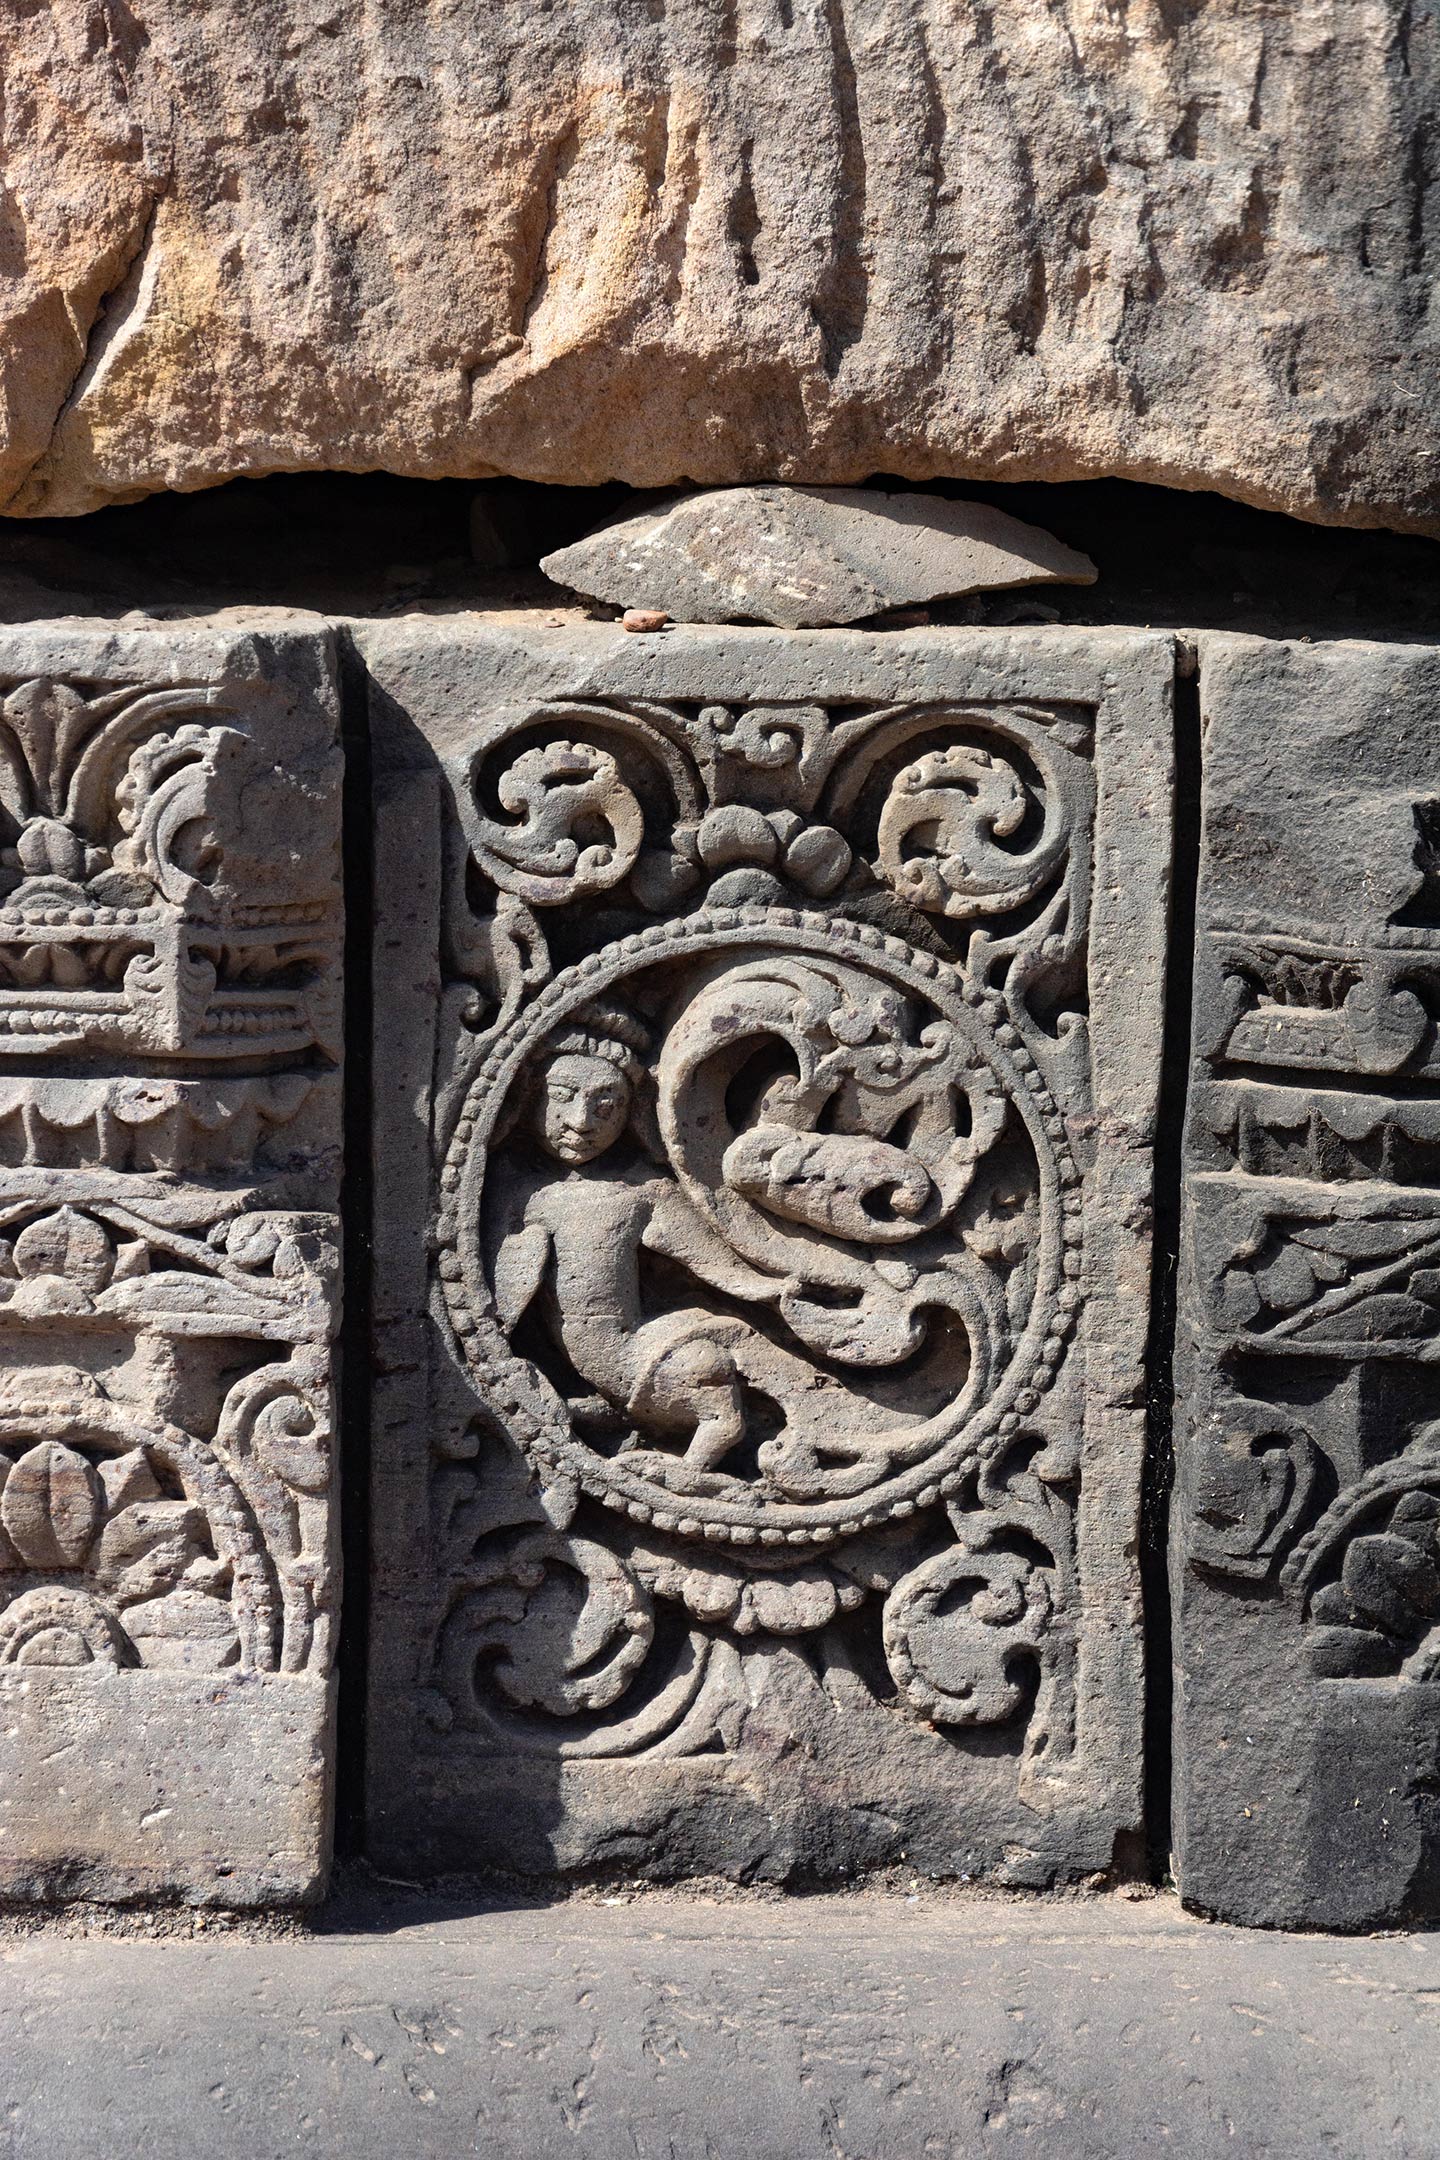 The medallion shows a kinnara (having the upper body of a human male and the lower body of a bird) with its tail forming a creeper motif. Kinnaras and kinnaris (having the upper body of a human female) are divine musicians who are skilled in dance, music, and poetry. The rest of the plaque surface is decorated with ardha padma (half lotus) and kalpa lata (creeper) motifs.